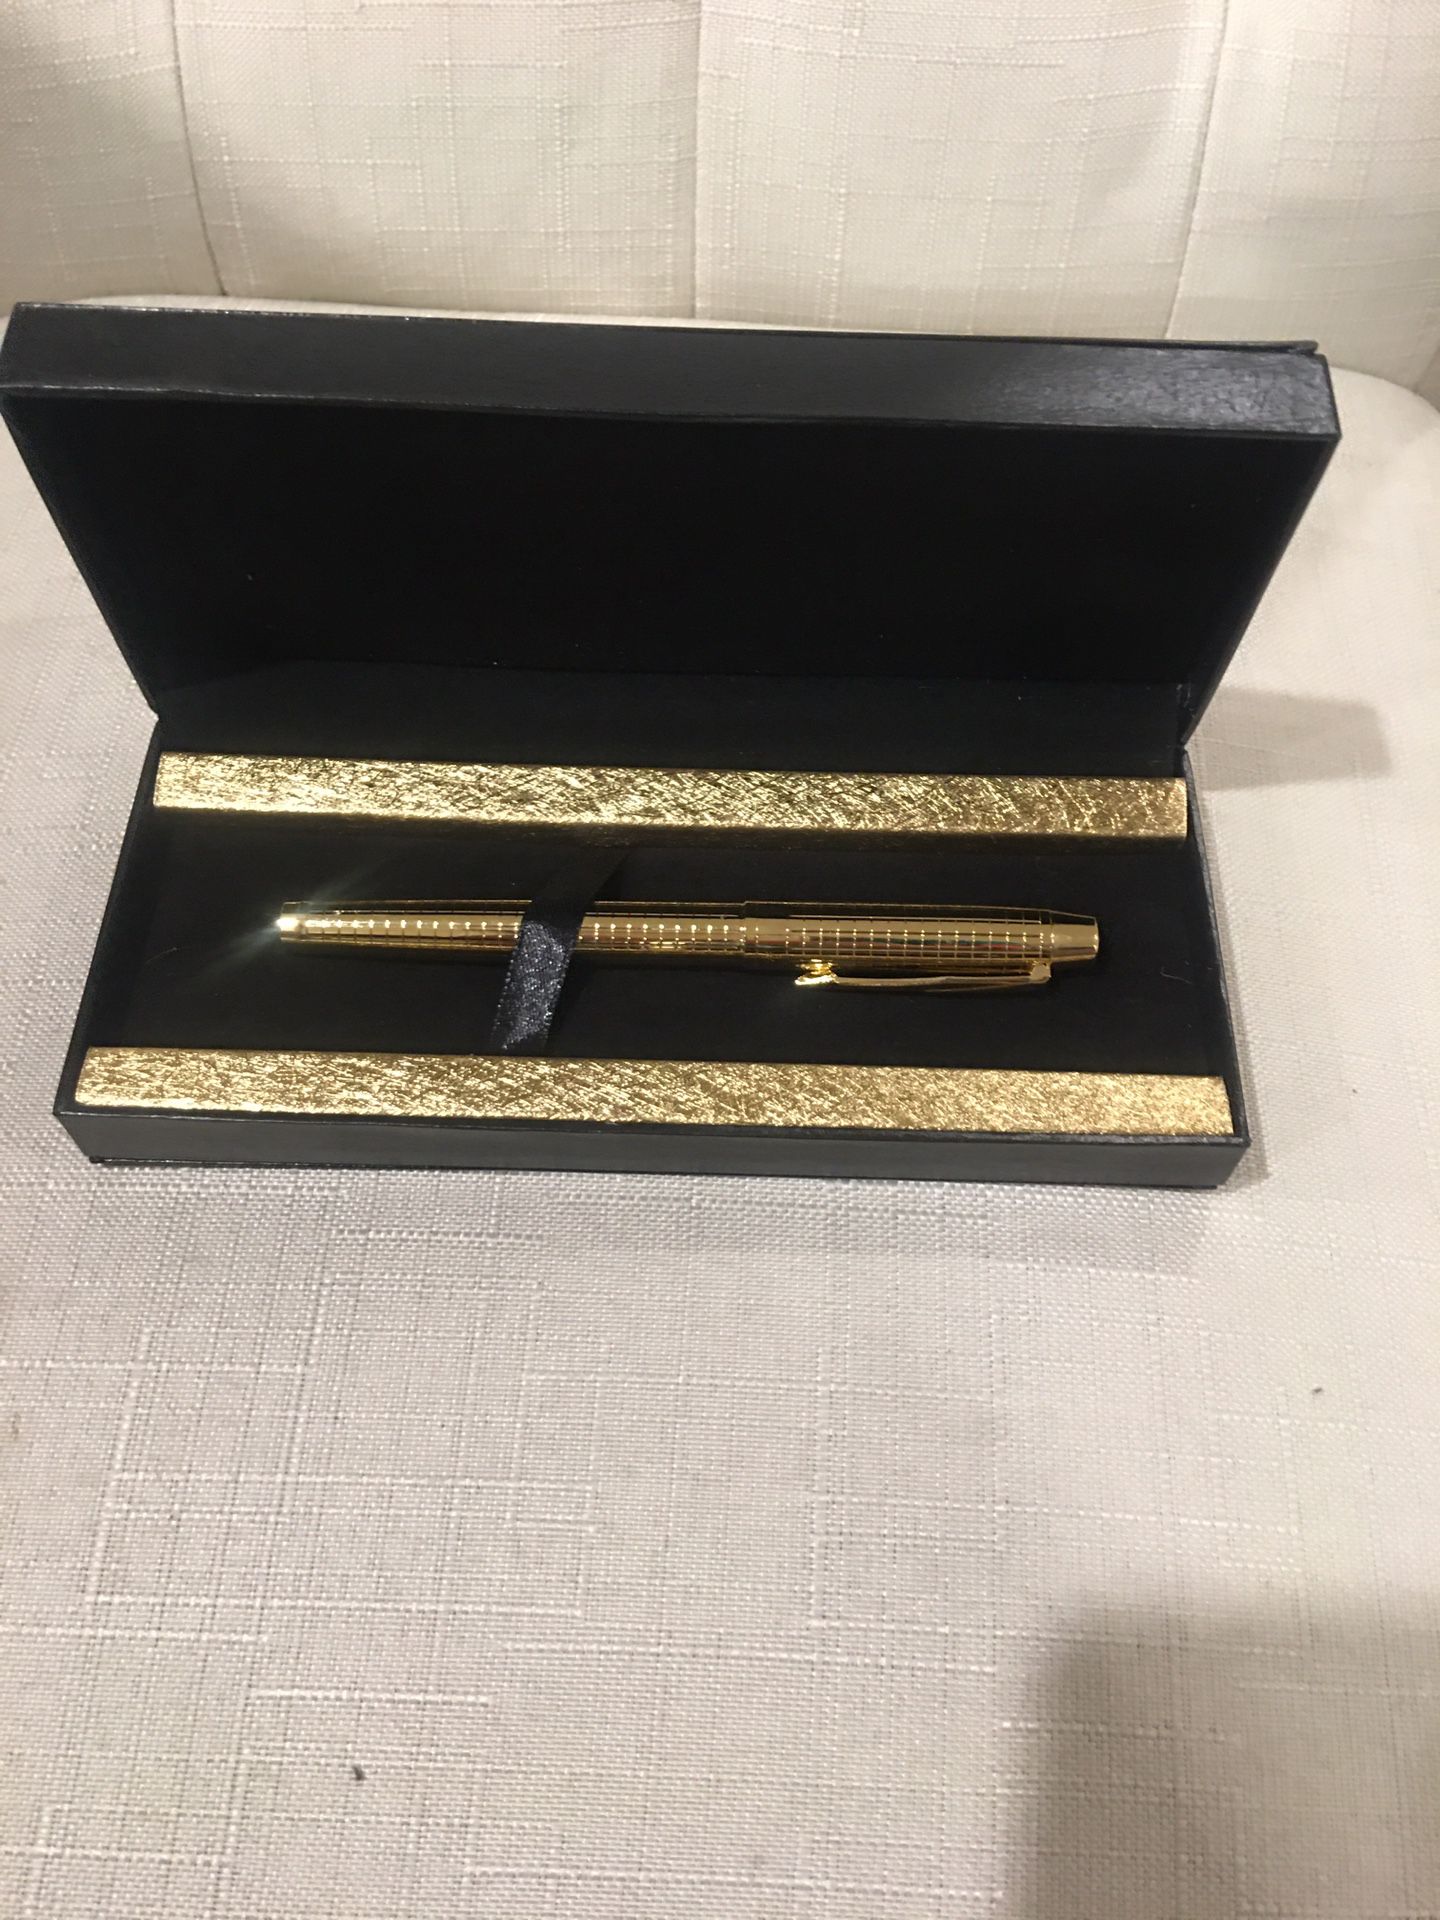 perfect gift idea: two ink pen or fountain pen with one beautiful gift box